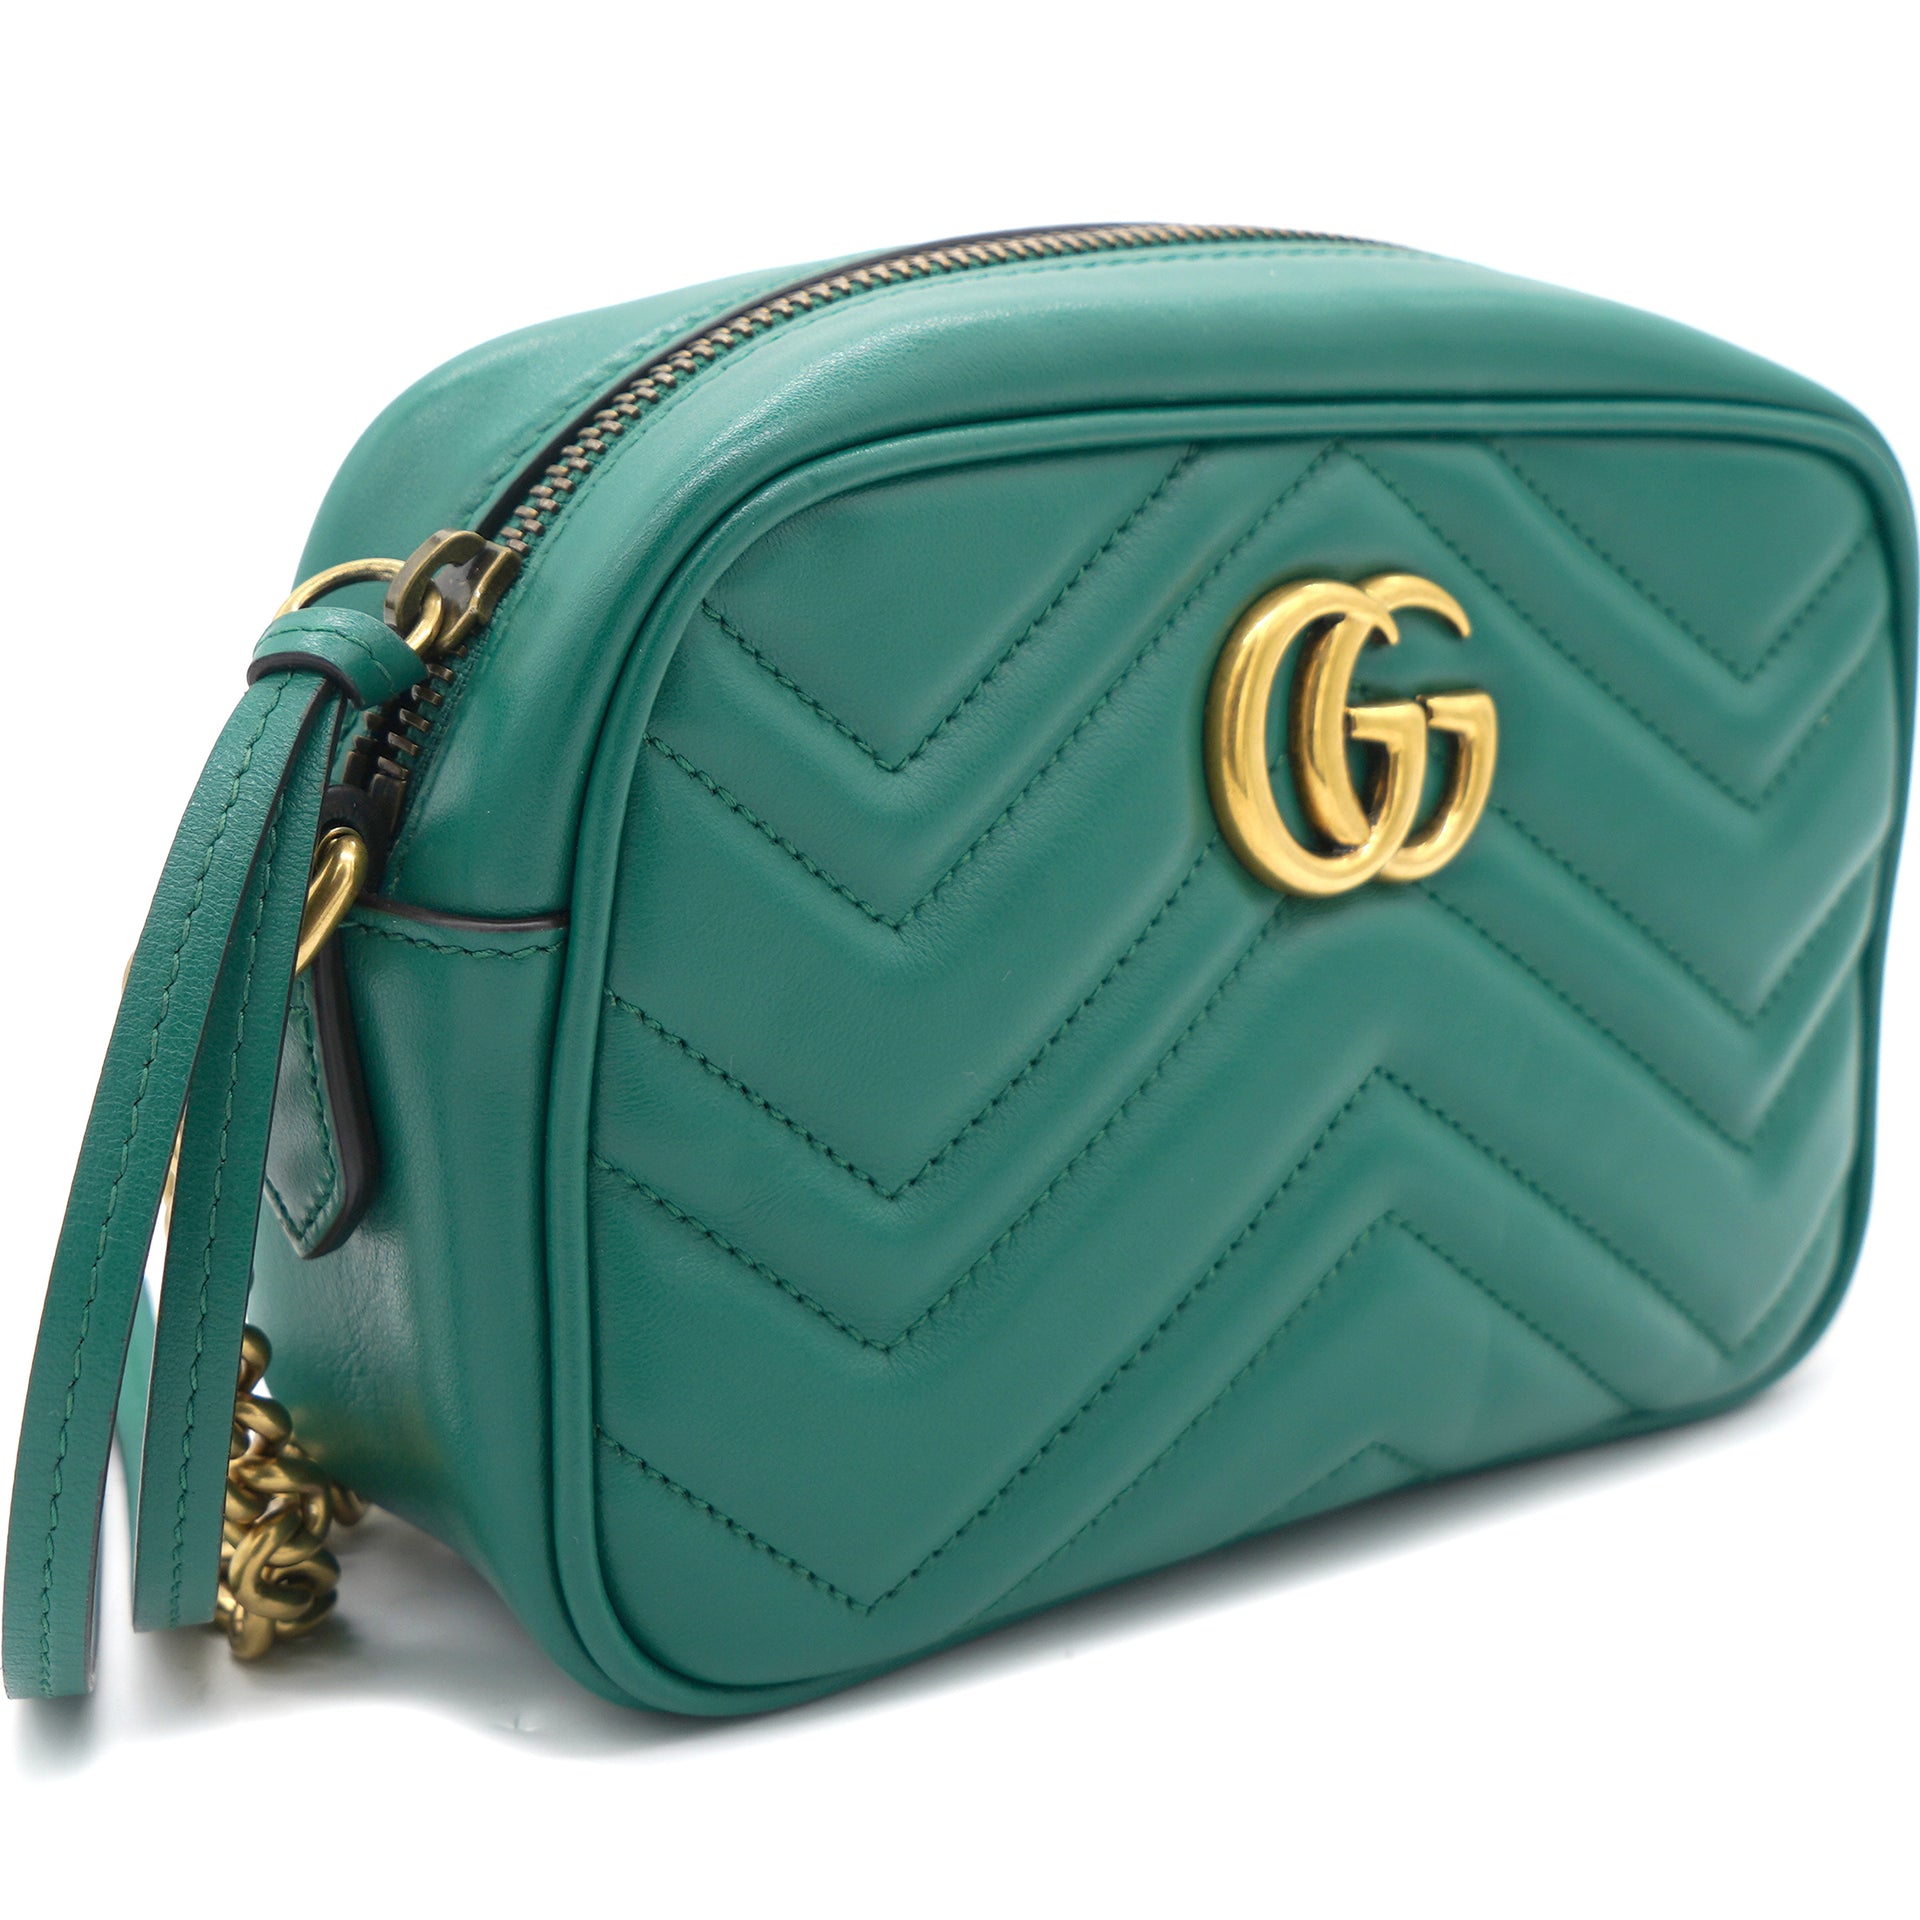 Gucci GG Marmont Camera Bag Matelasse Mini White in Leather with